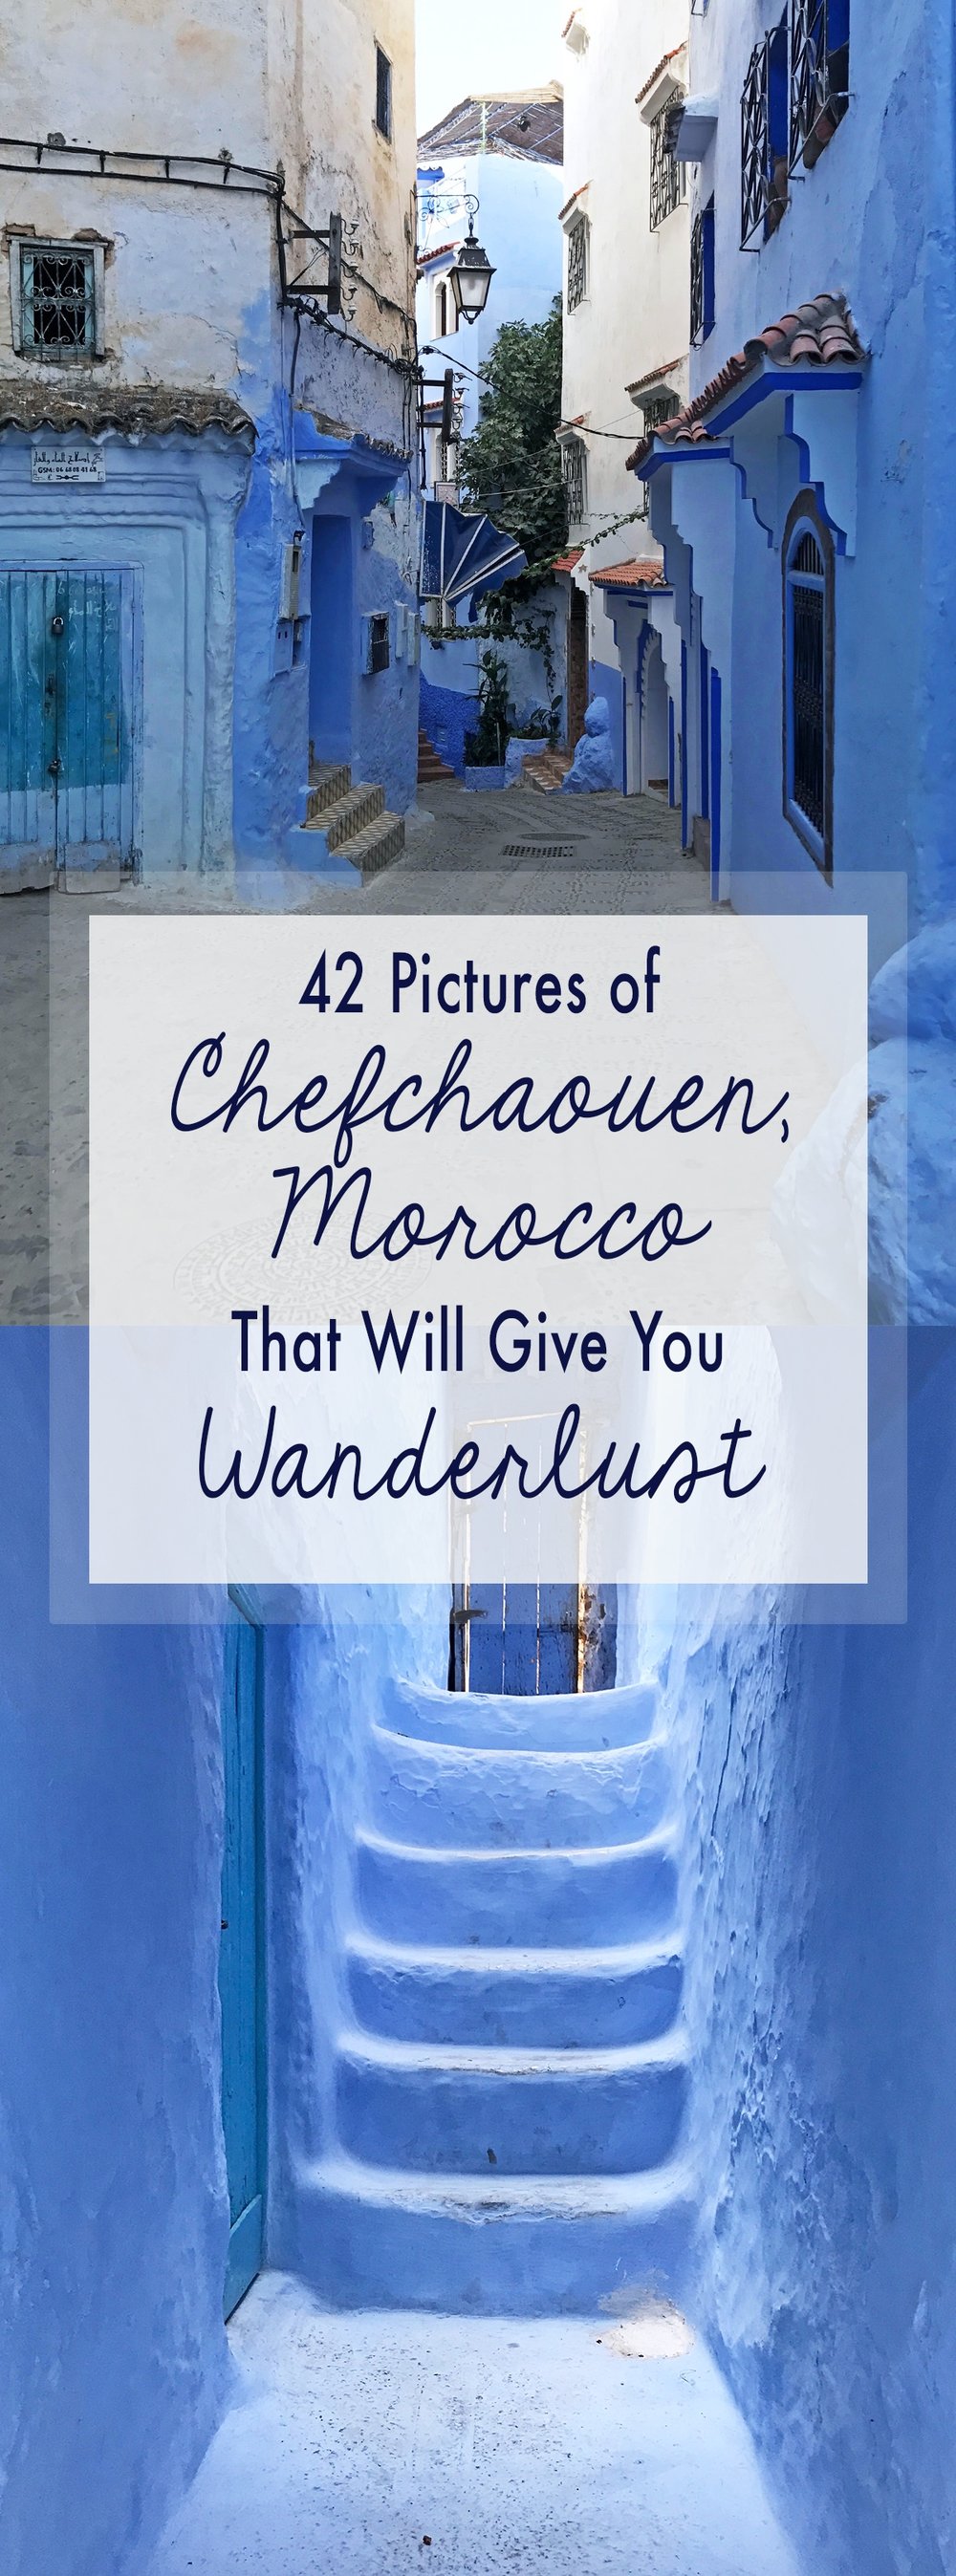 Chefchaouen Morocco | The Blue City